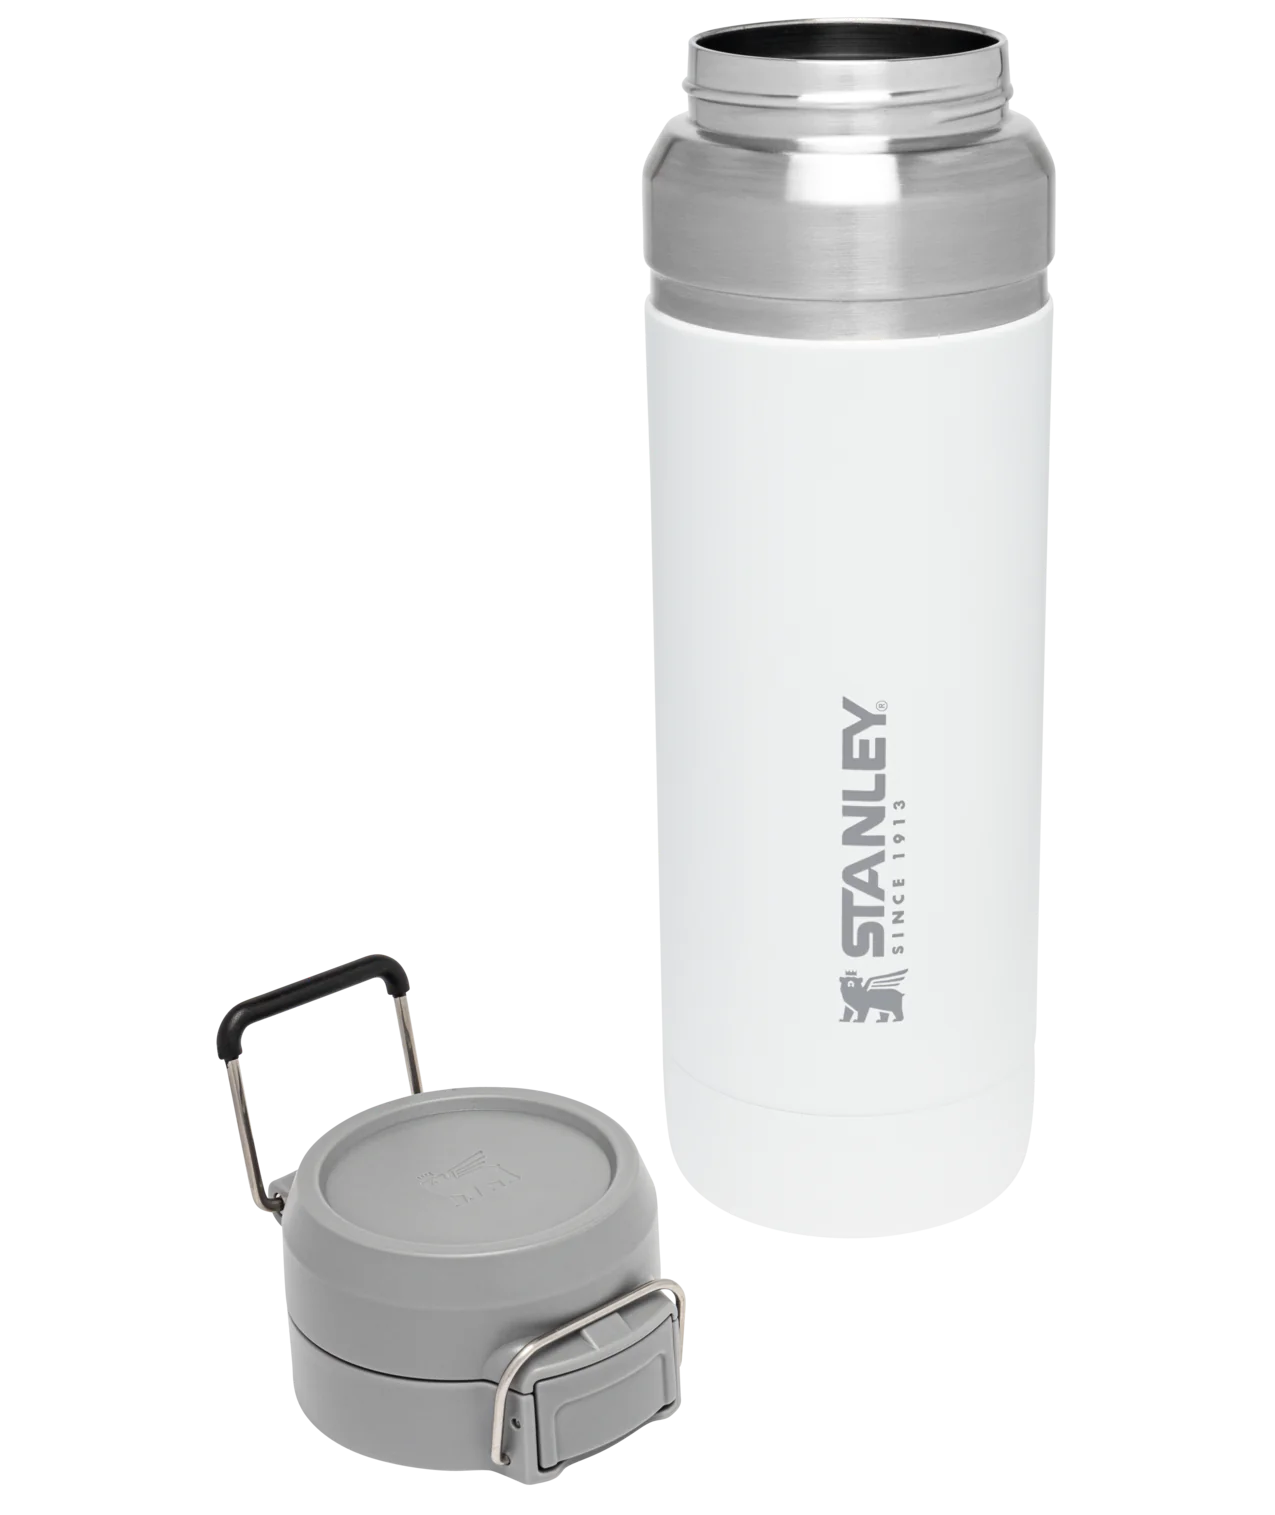 Stanley insulated water bottle (36 ounces)